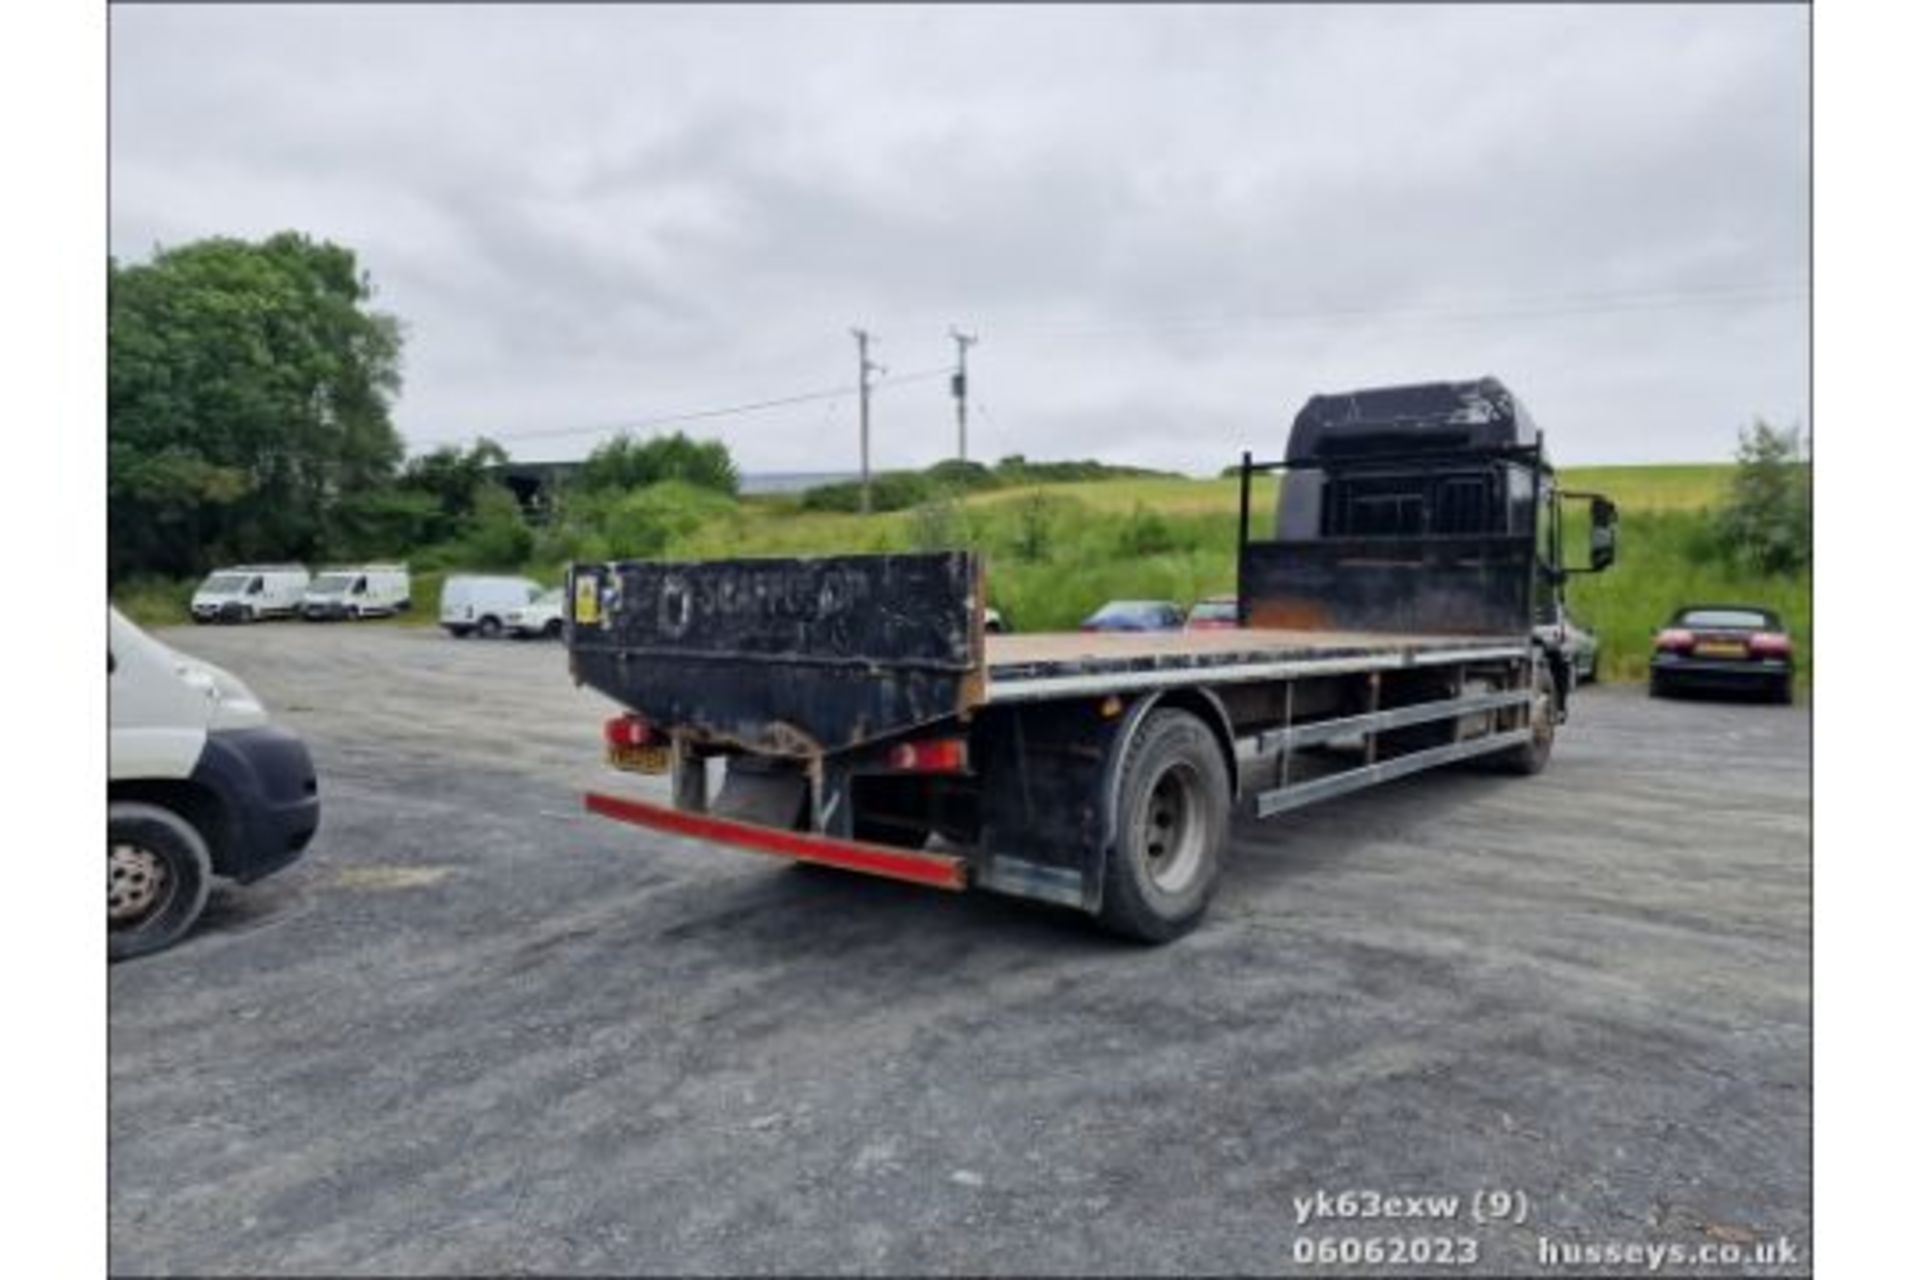 13/63 IVECO EUROCARGO (MY 2008) - 5880cc 2dr Flat Bed (Black) - Image 9 of 21